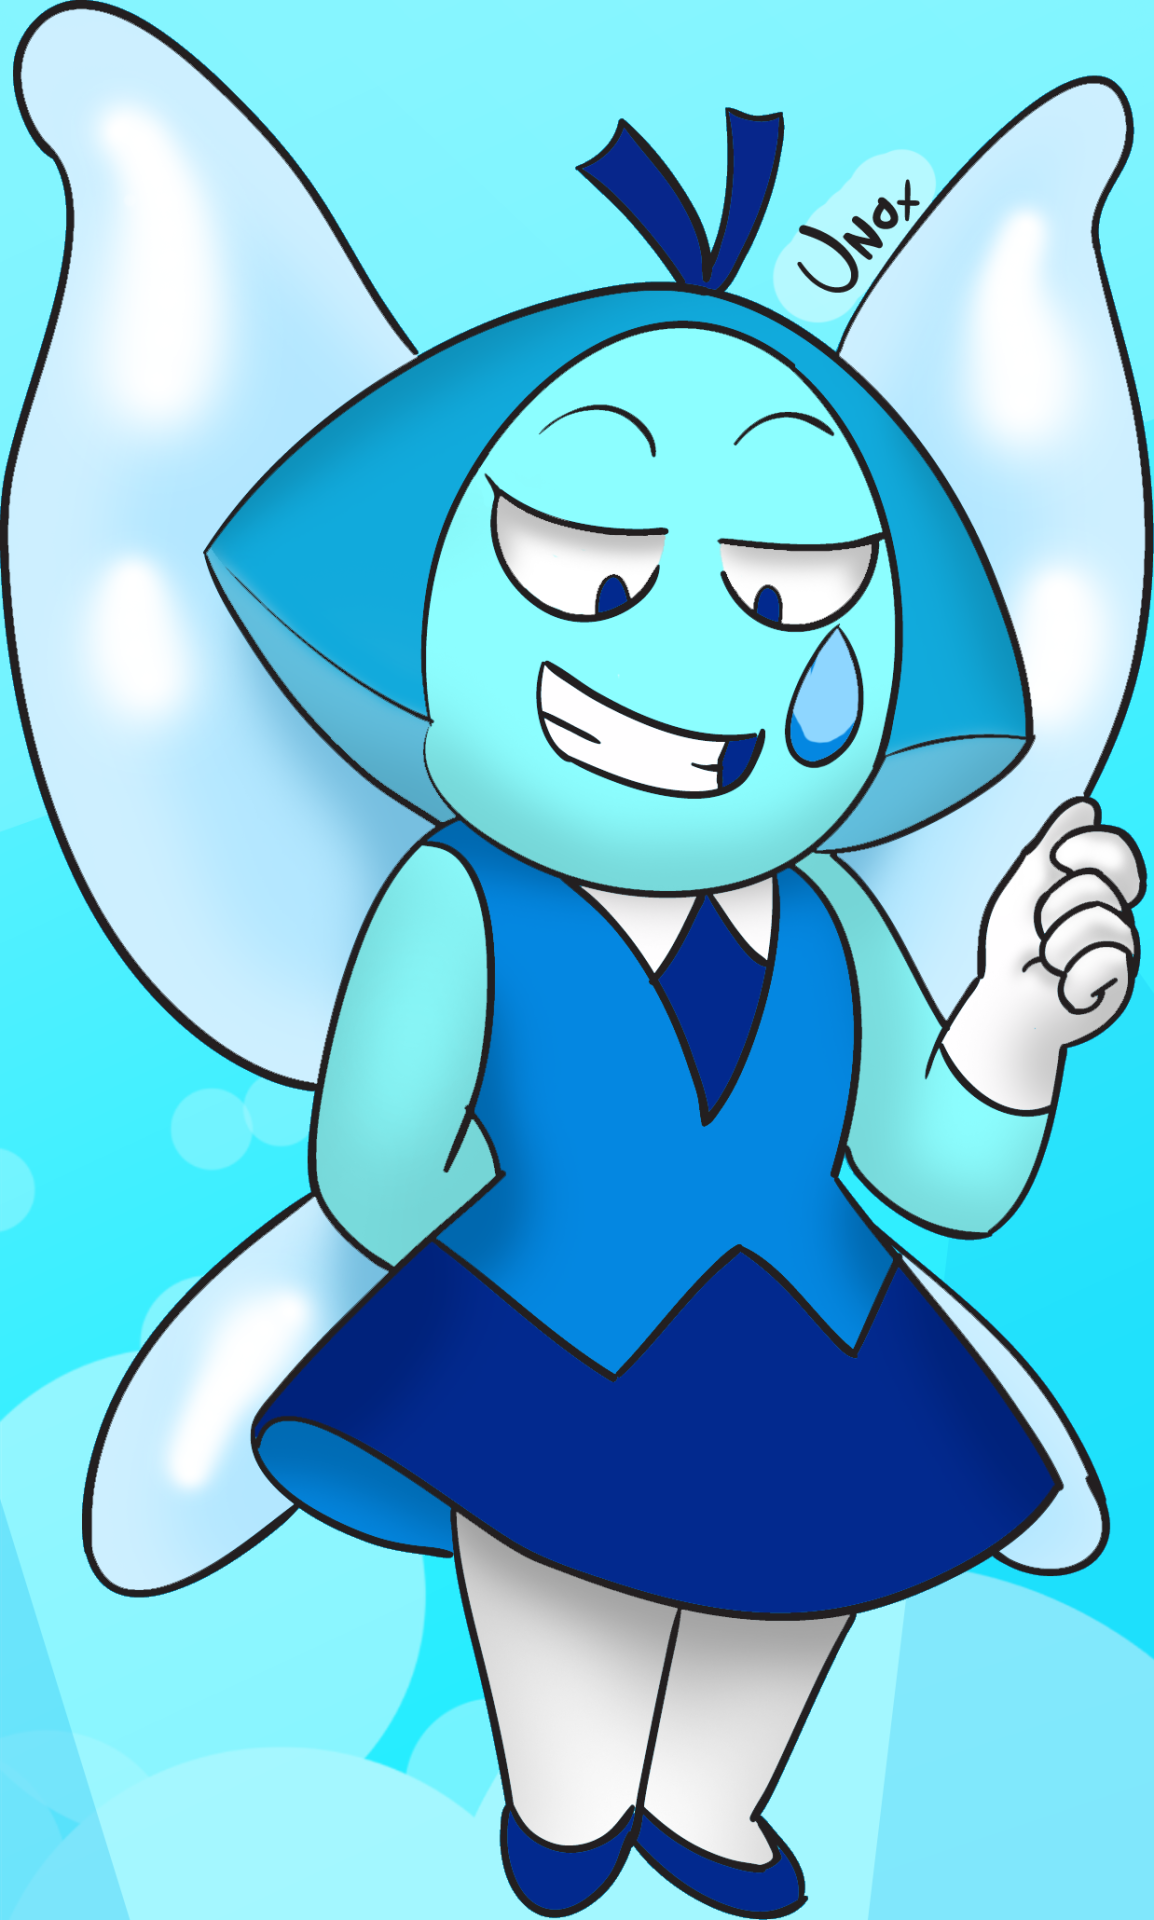 Aquamarine, one of the first non requested, non-collab piece in a while, shes a jerk